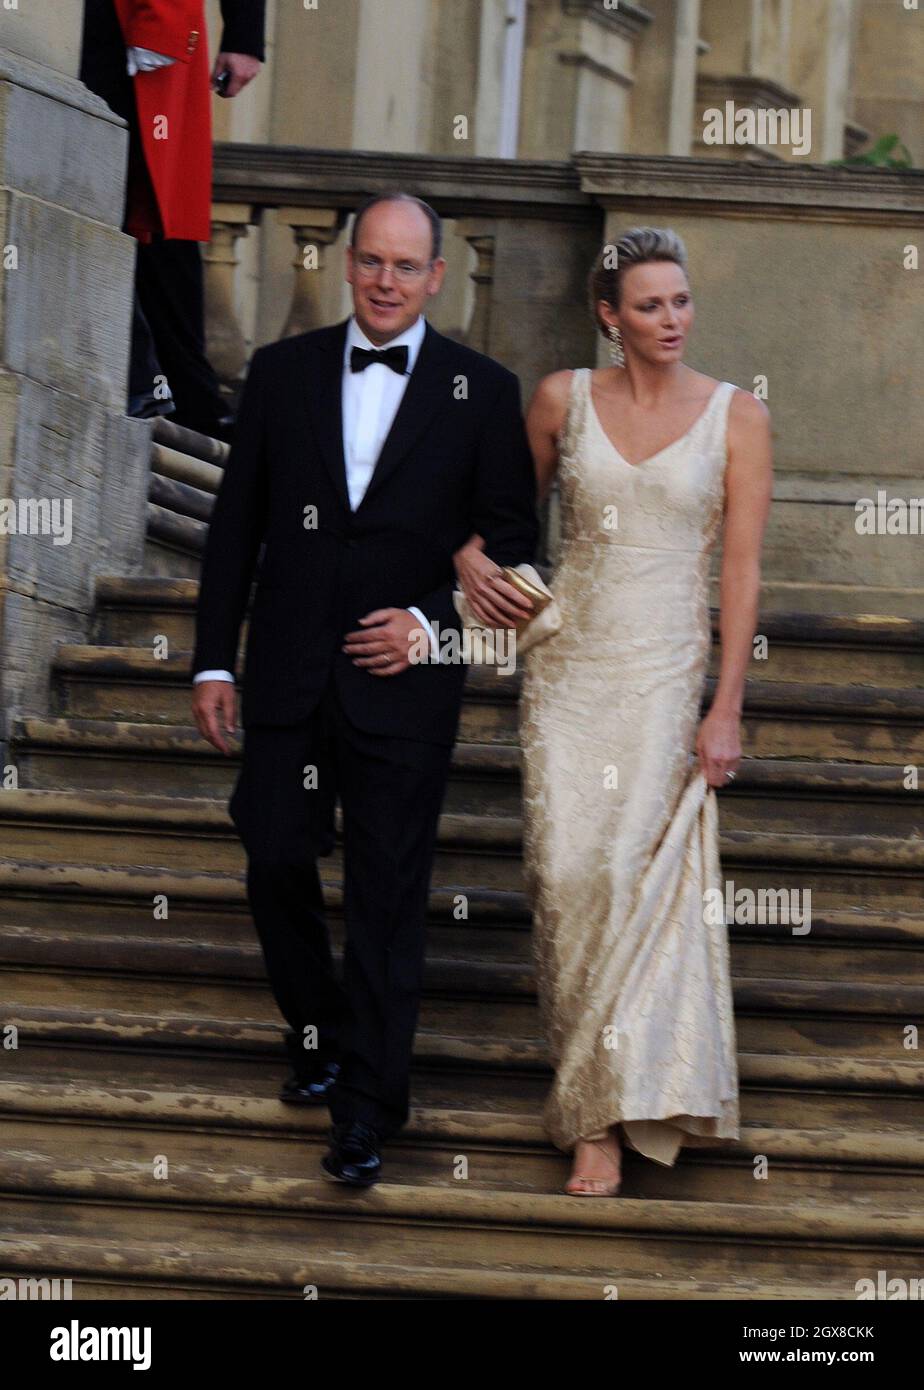 Prince Albert ll and Princess Charlene of Monaco attend the Yorkshire Variety Club Golden Jubilee Charity Ball at Harewood House near Leeds on September 4, 2011 Stock Photo